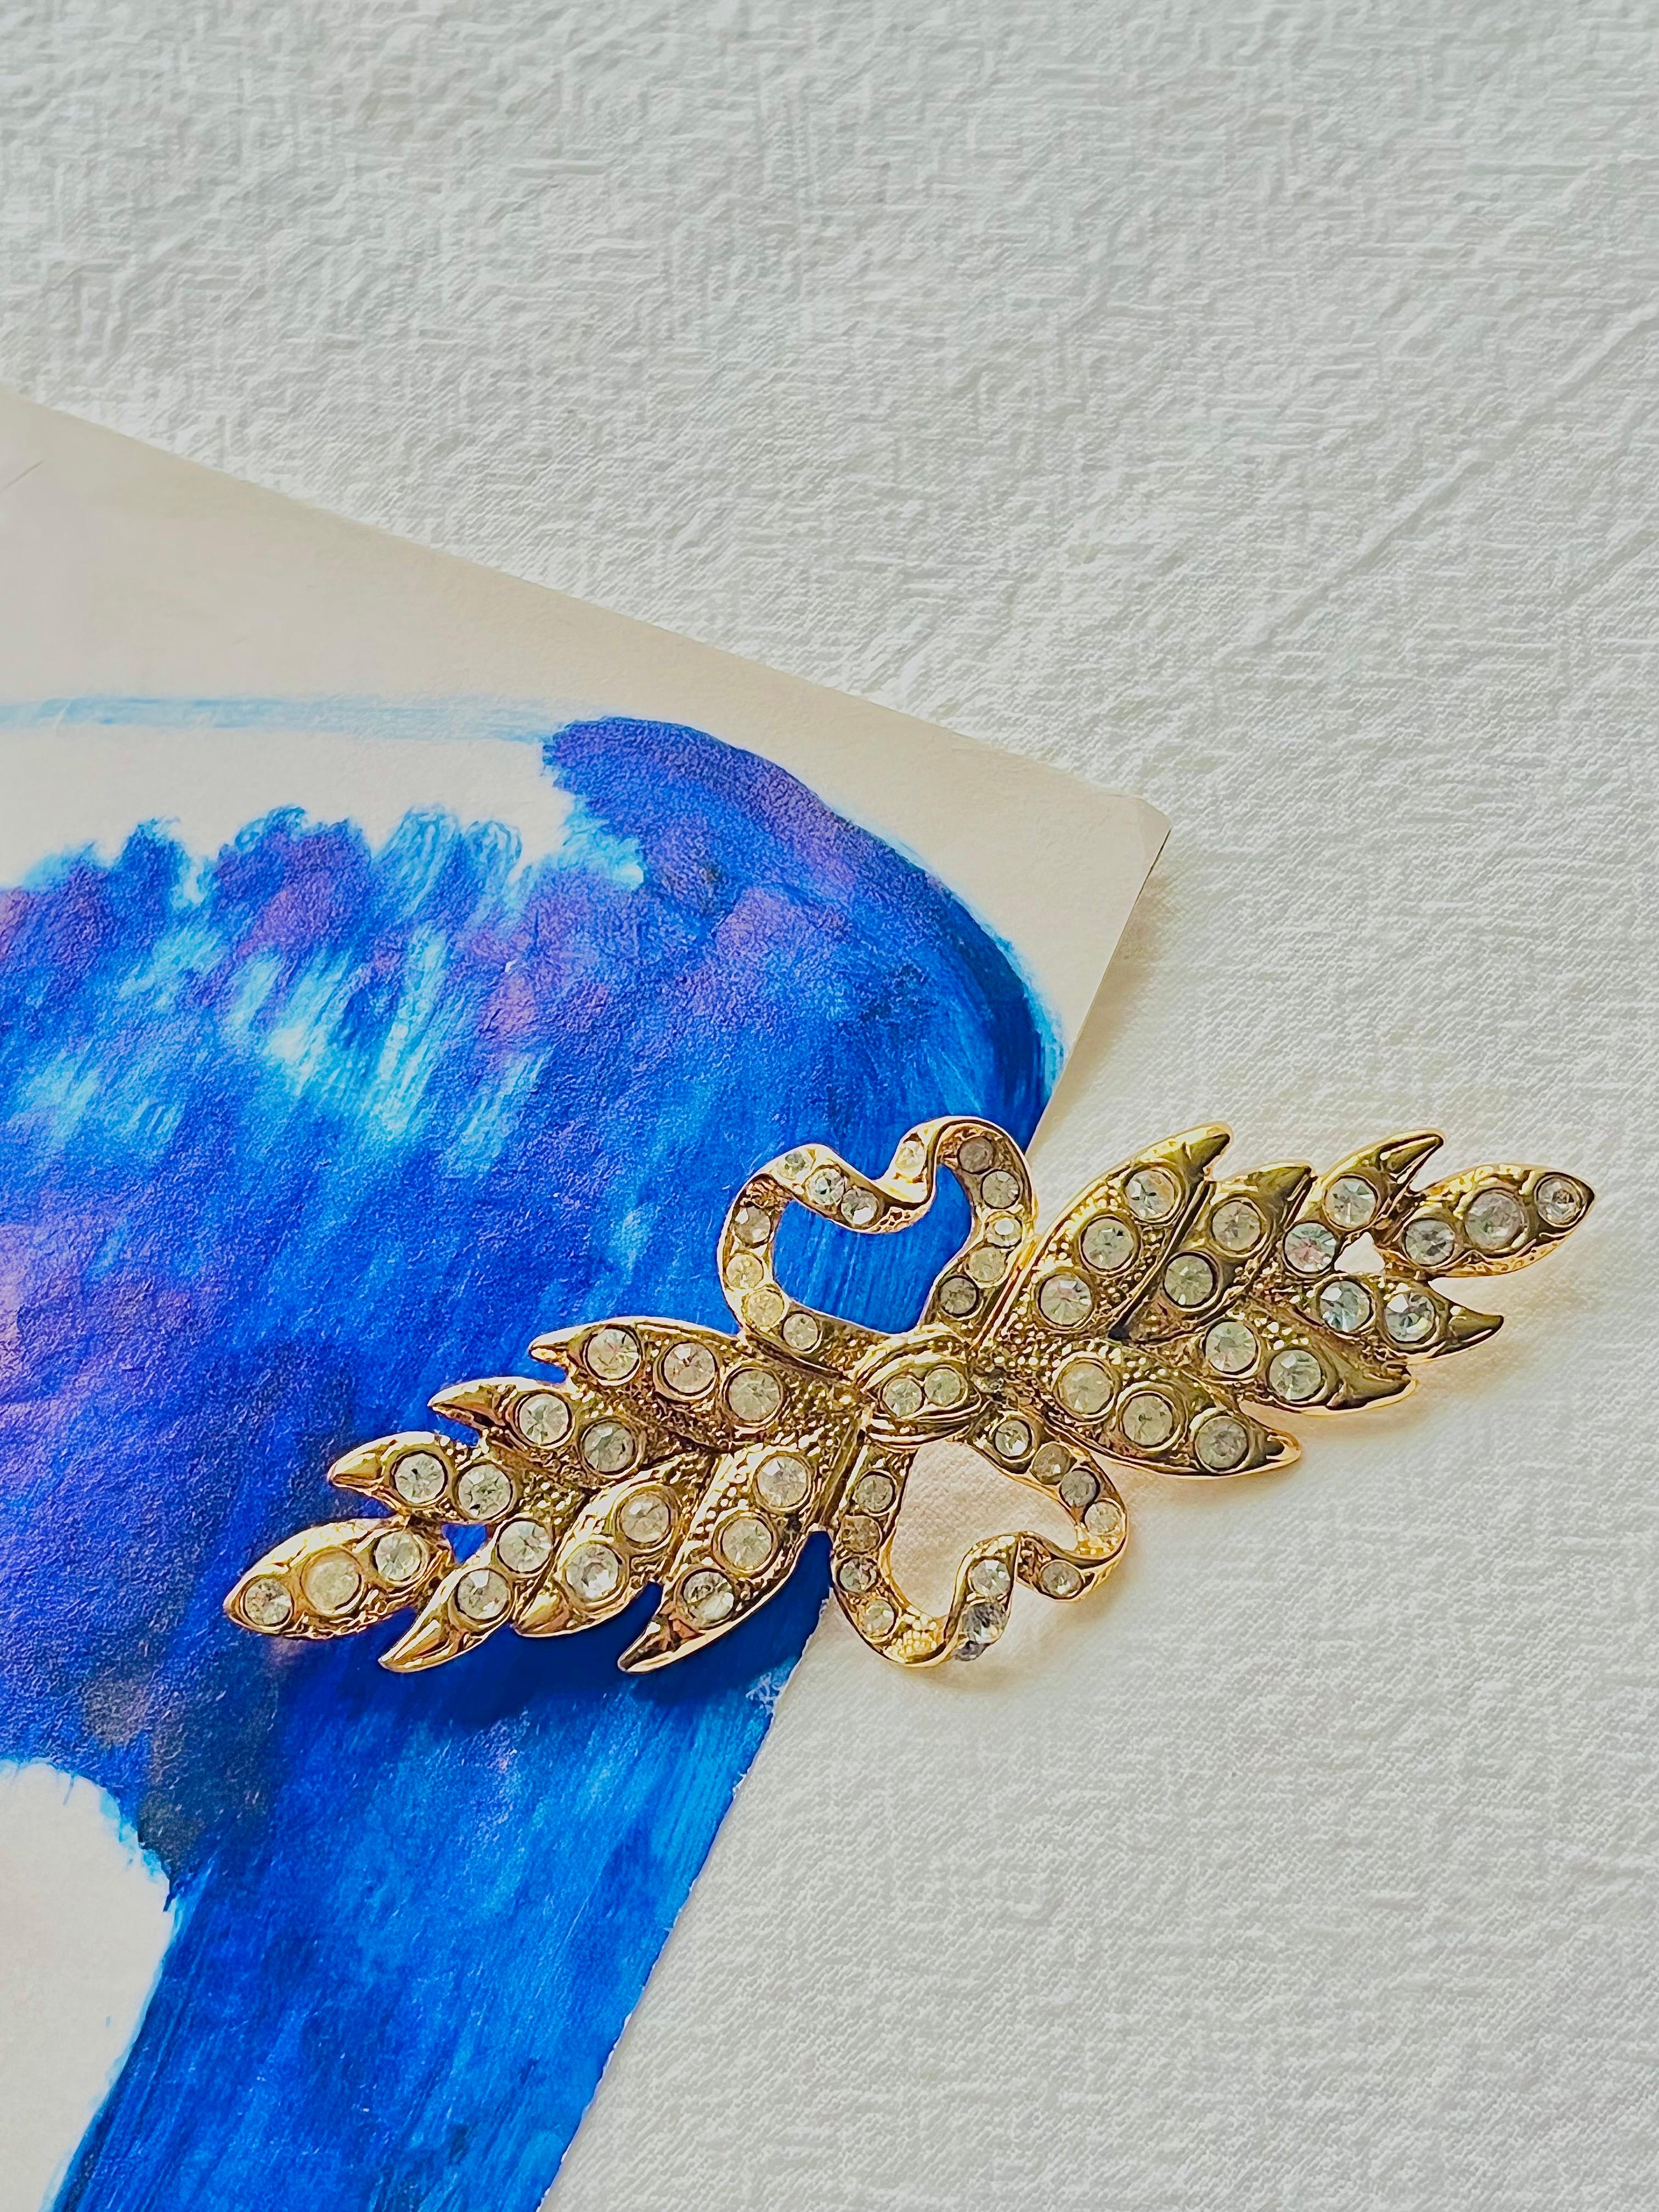 Yves Saint Laurent YSL Vintage Long Leaf Feather Bow Heart Crystals Brooch, Gold Tone

Very good condition. Very rare. 100% Genuine.

Signed on the back Yves Saint Laurent, Made in France.

Size: 8.8*3.5 cm.

Weight: 23 g.

_ _ _

Great for everyday